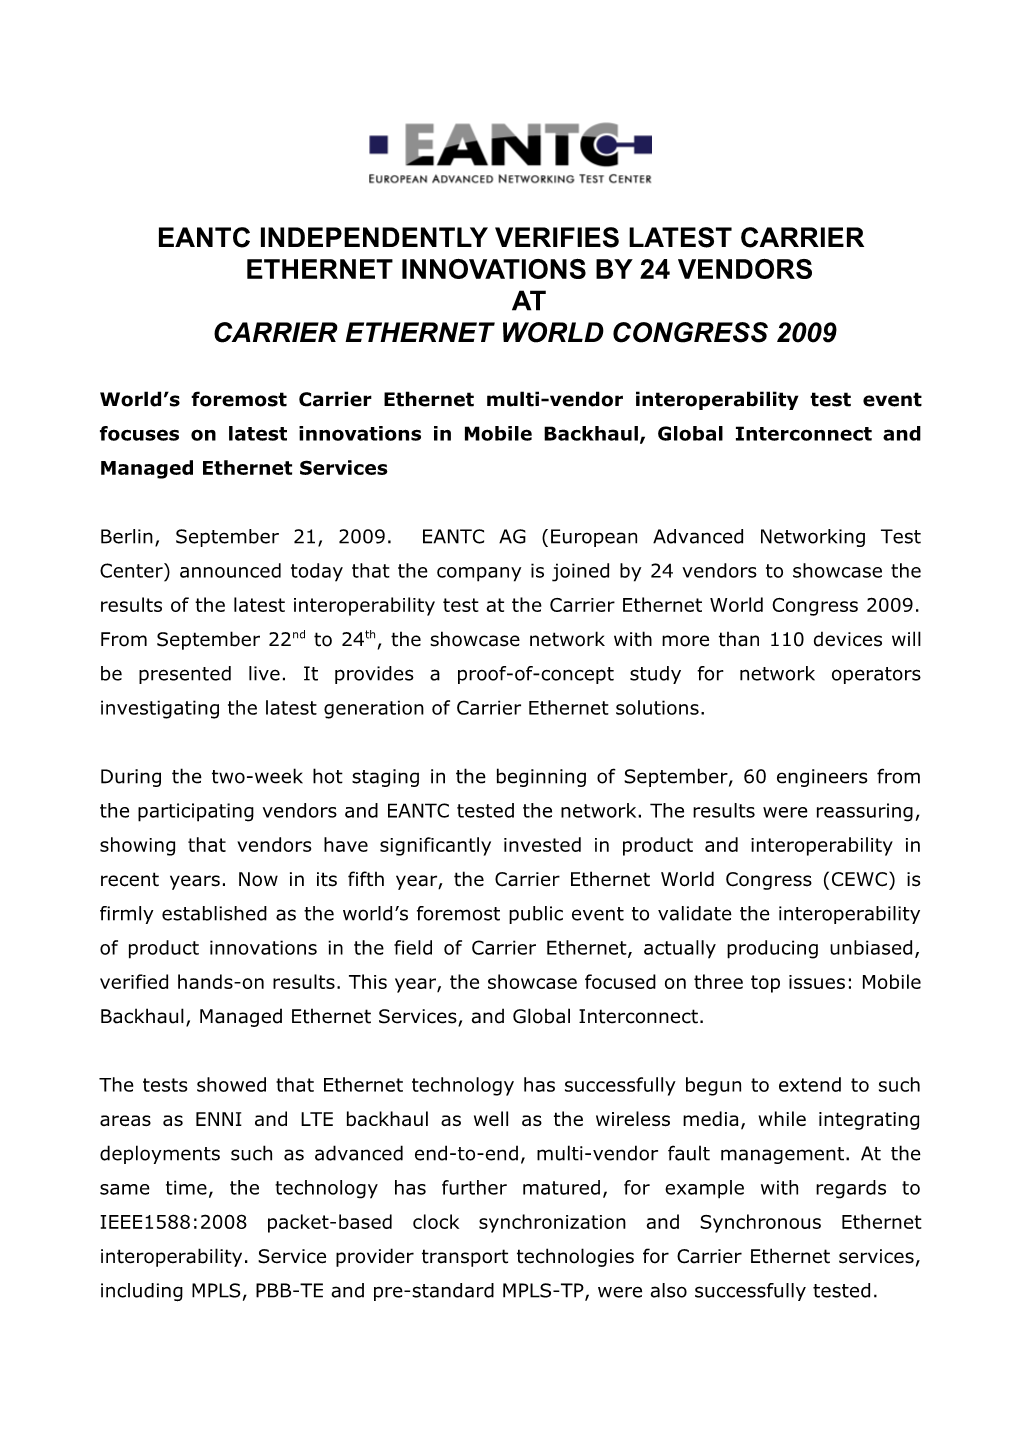 Eantc Independently Verifies Latest Carrier Ethernet Innovations by 24 Vendors at Carrier